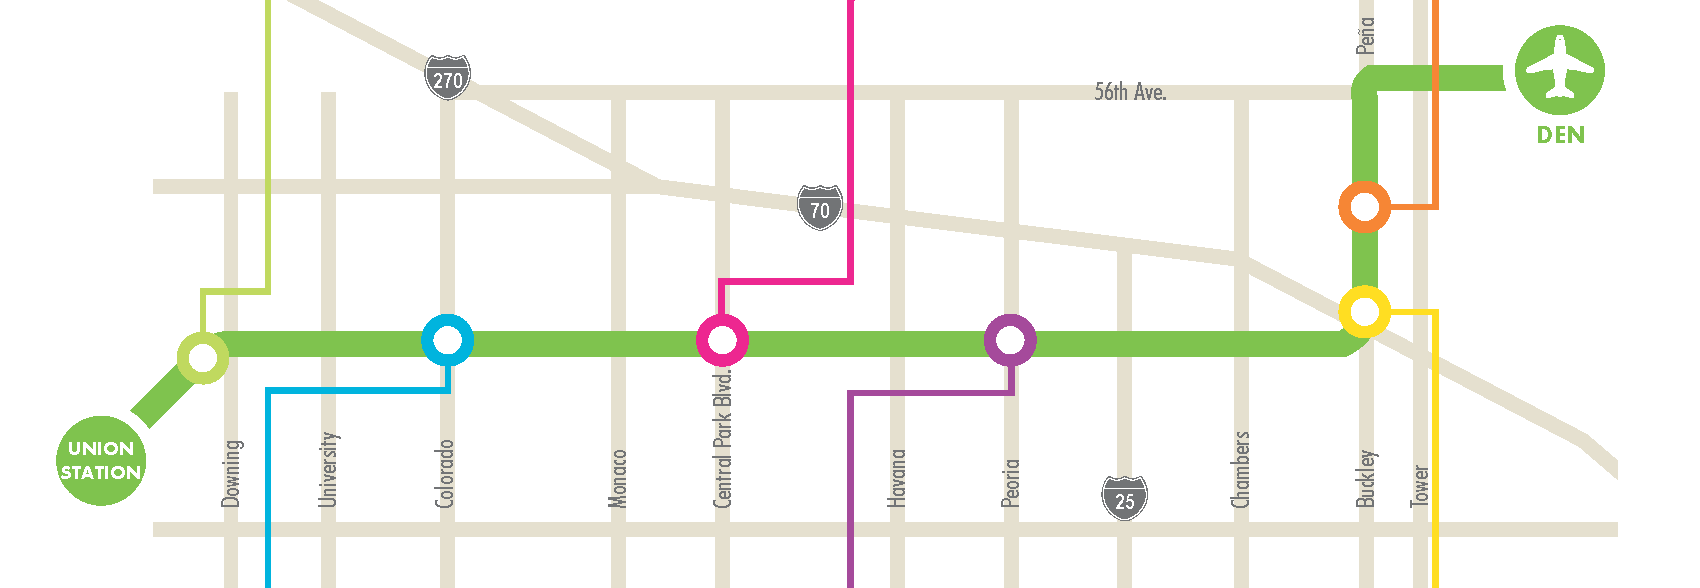 A map showcasing the development and opportunity brought by the A Line bus routes in Chicago.